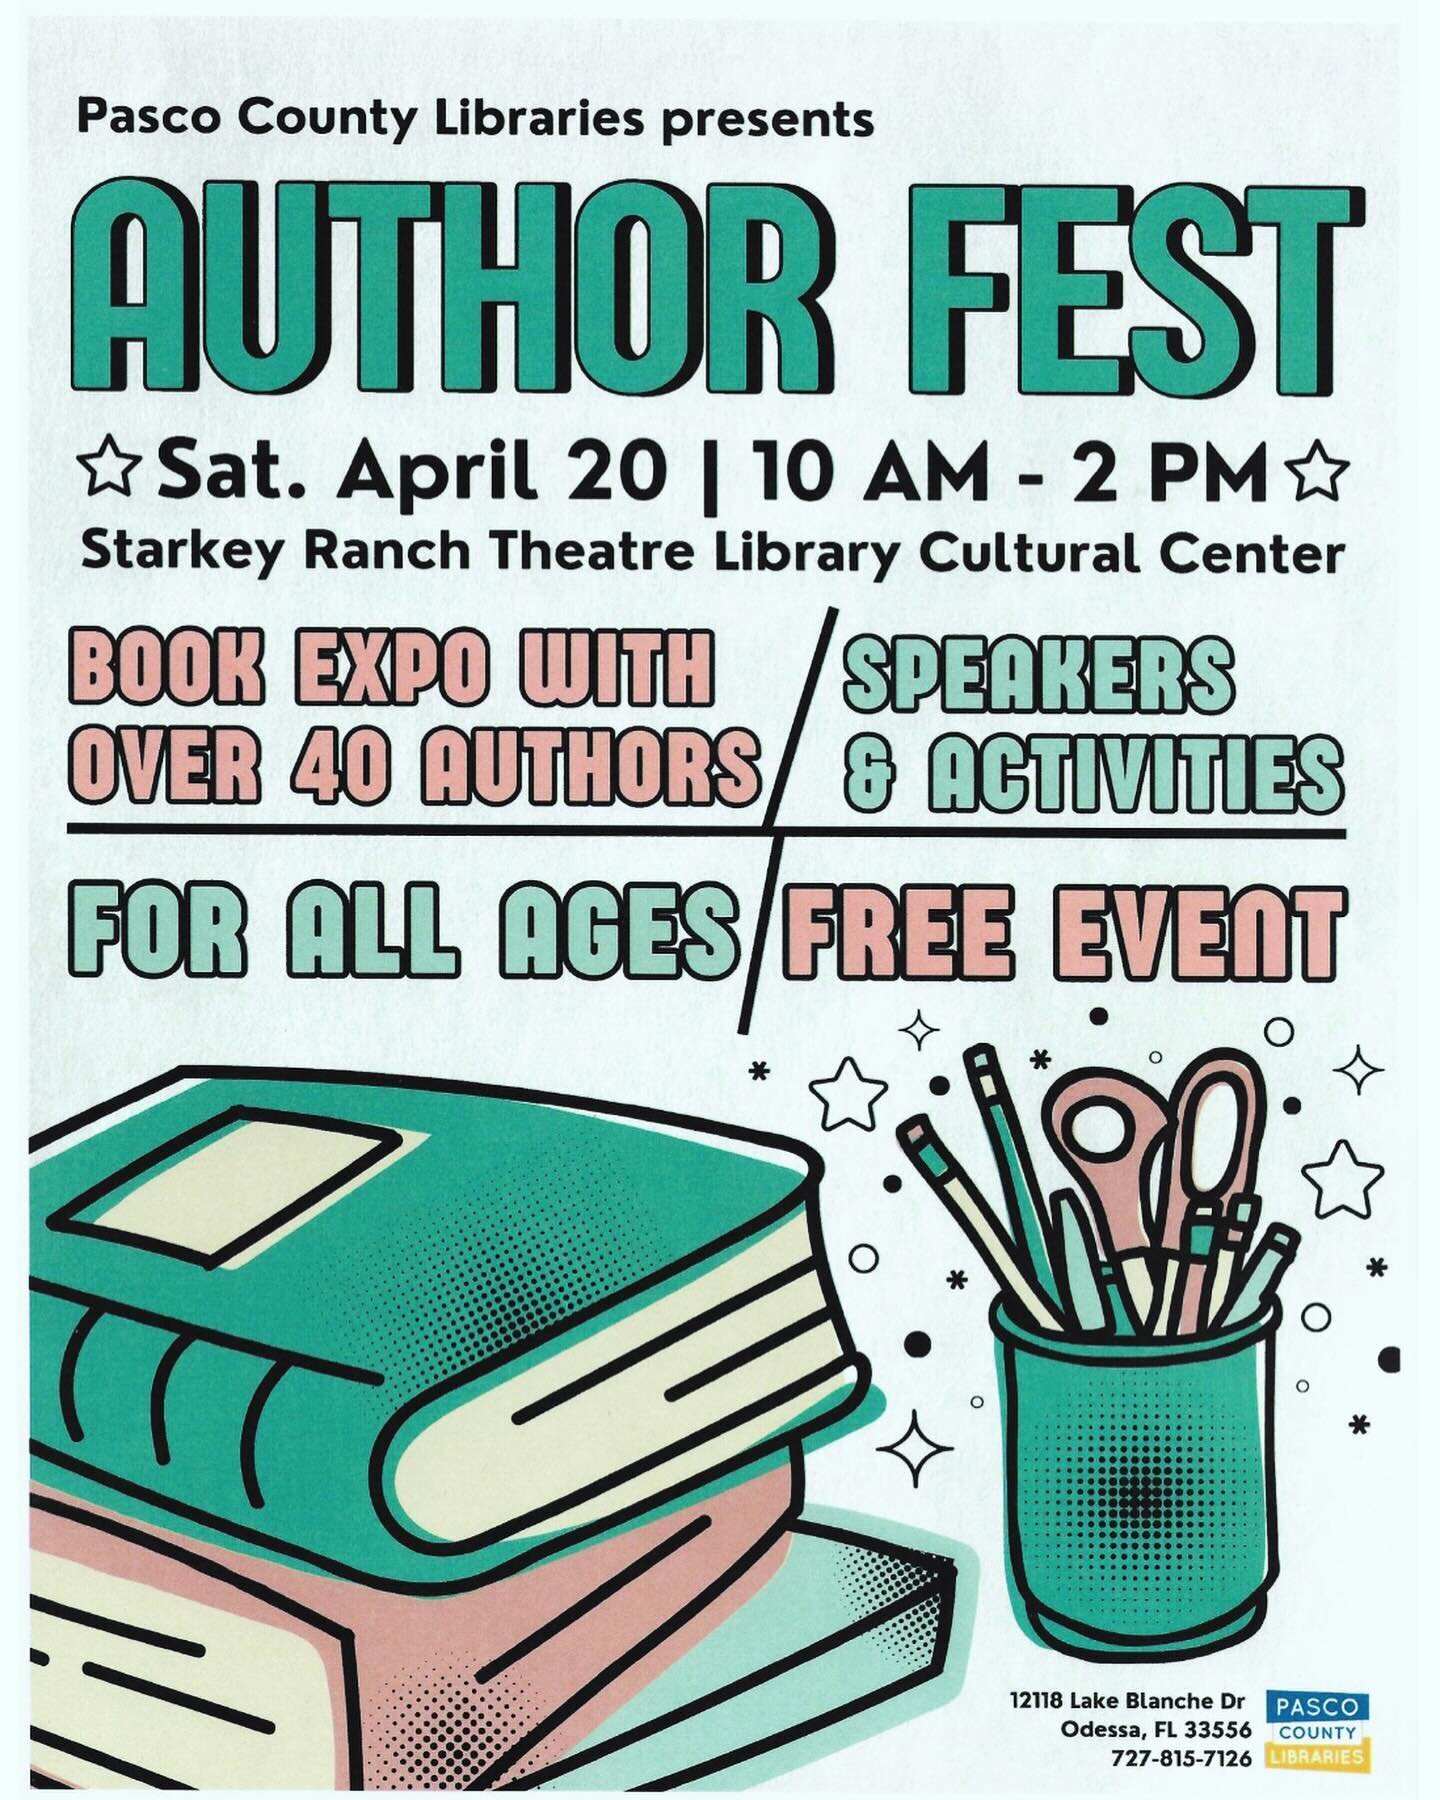 Attention Pasco County peeps, perps, and bookloversssssssss. I&rsquo;ll be at #Authorfest Saturday, April 20, talking about the good, the bad, the ugly, and the crying-on-the-bathroom-floor-despondency I went through to go from 106 rejections to a 6-